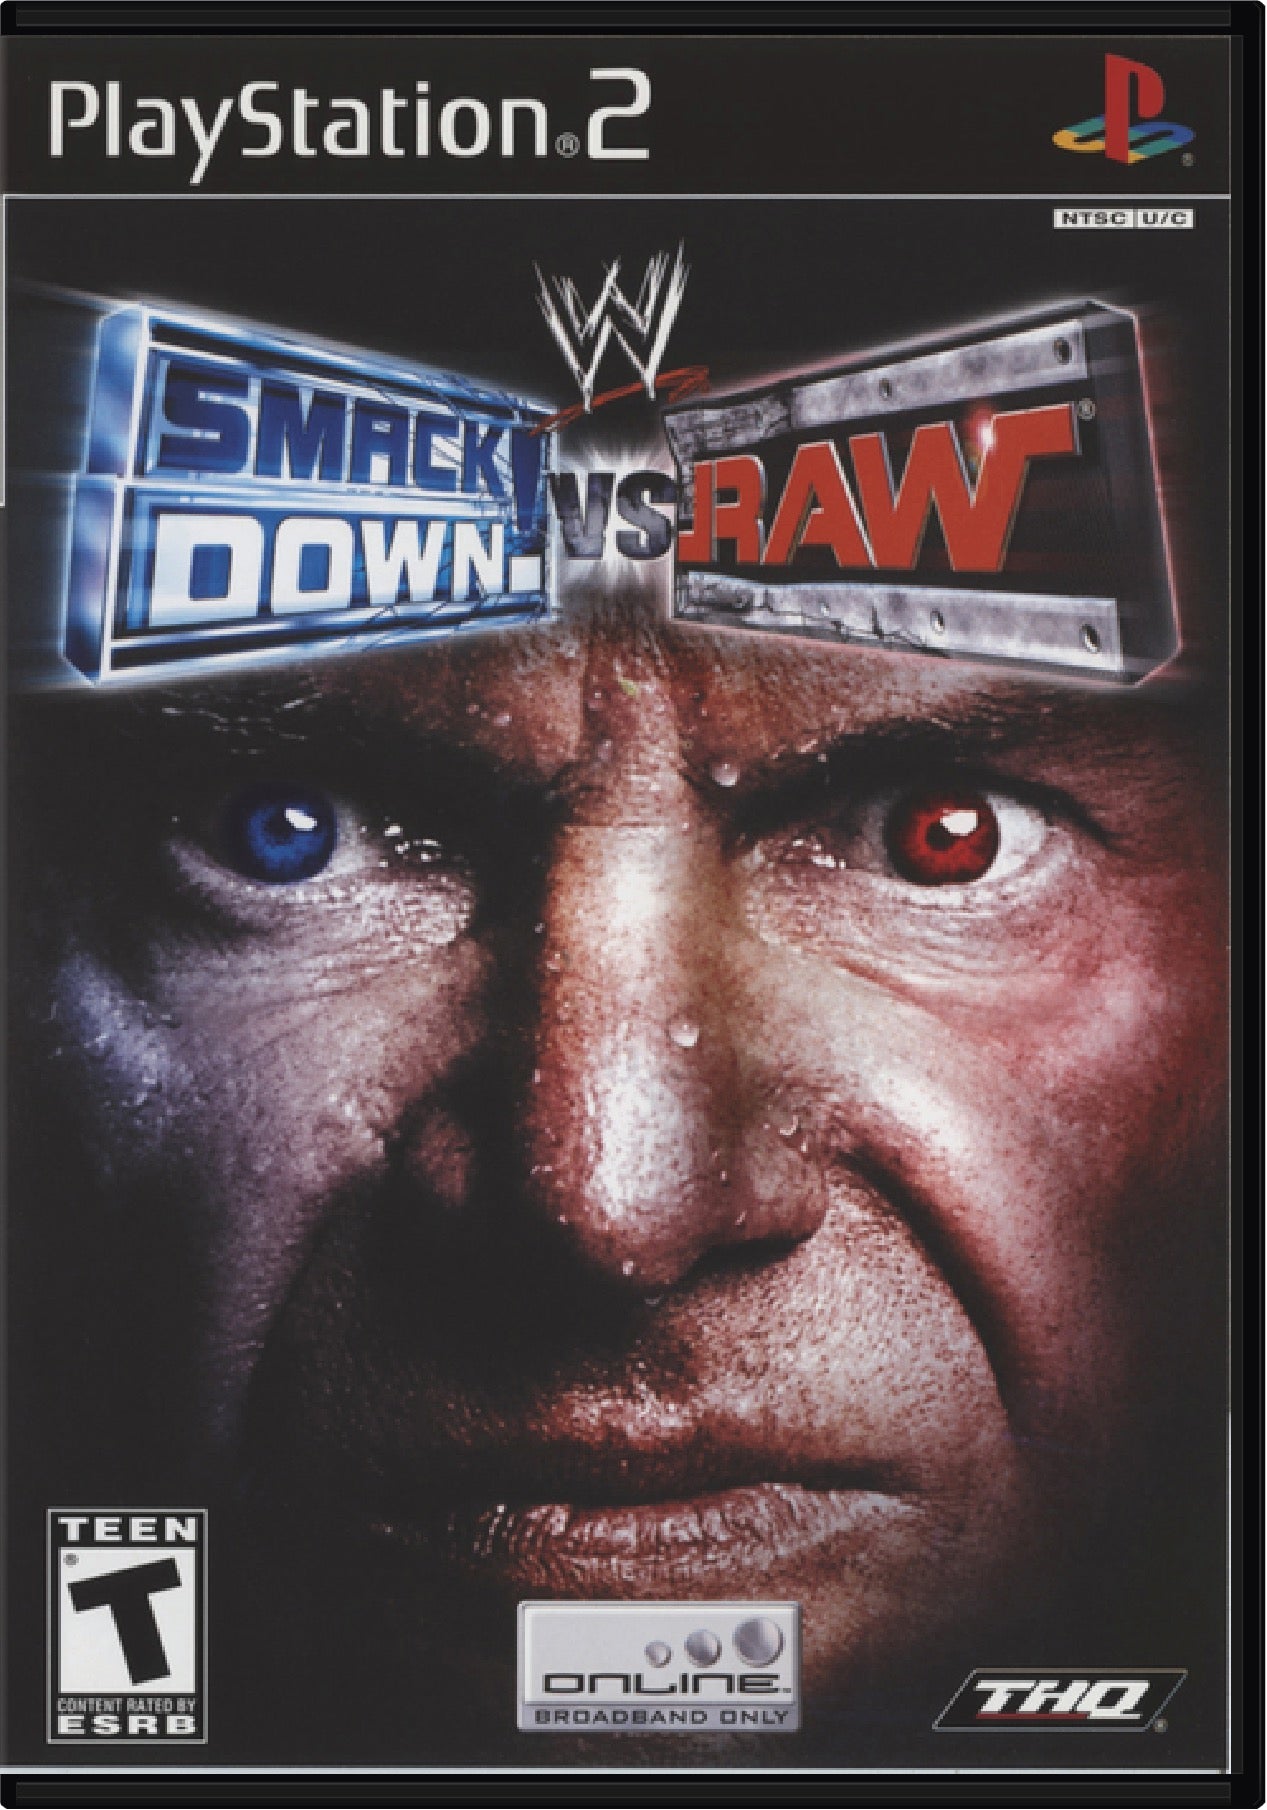 WWE Smackdown vs Raw Cover Art and Product Photo